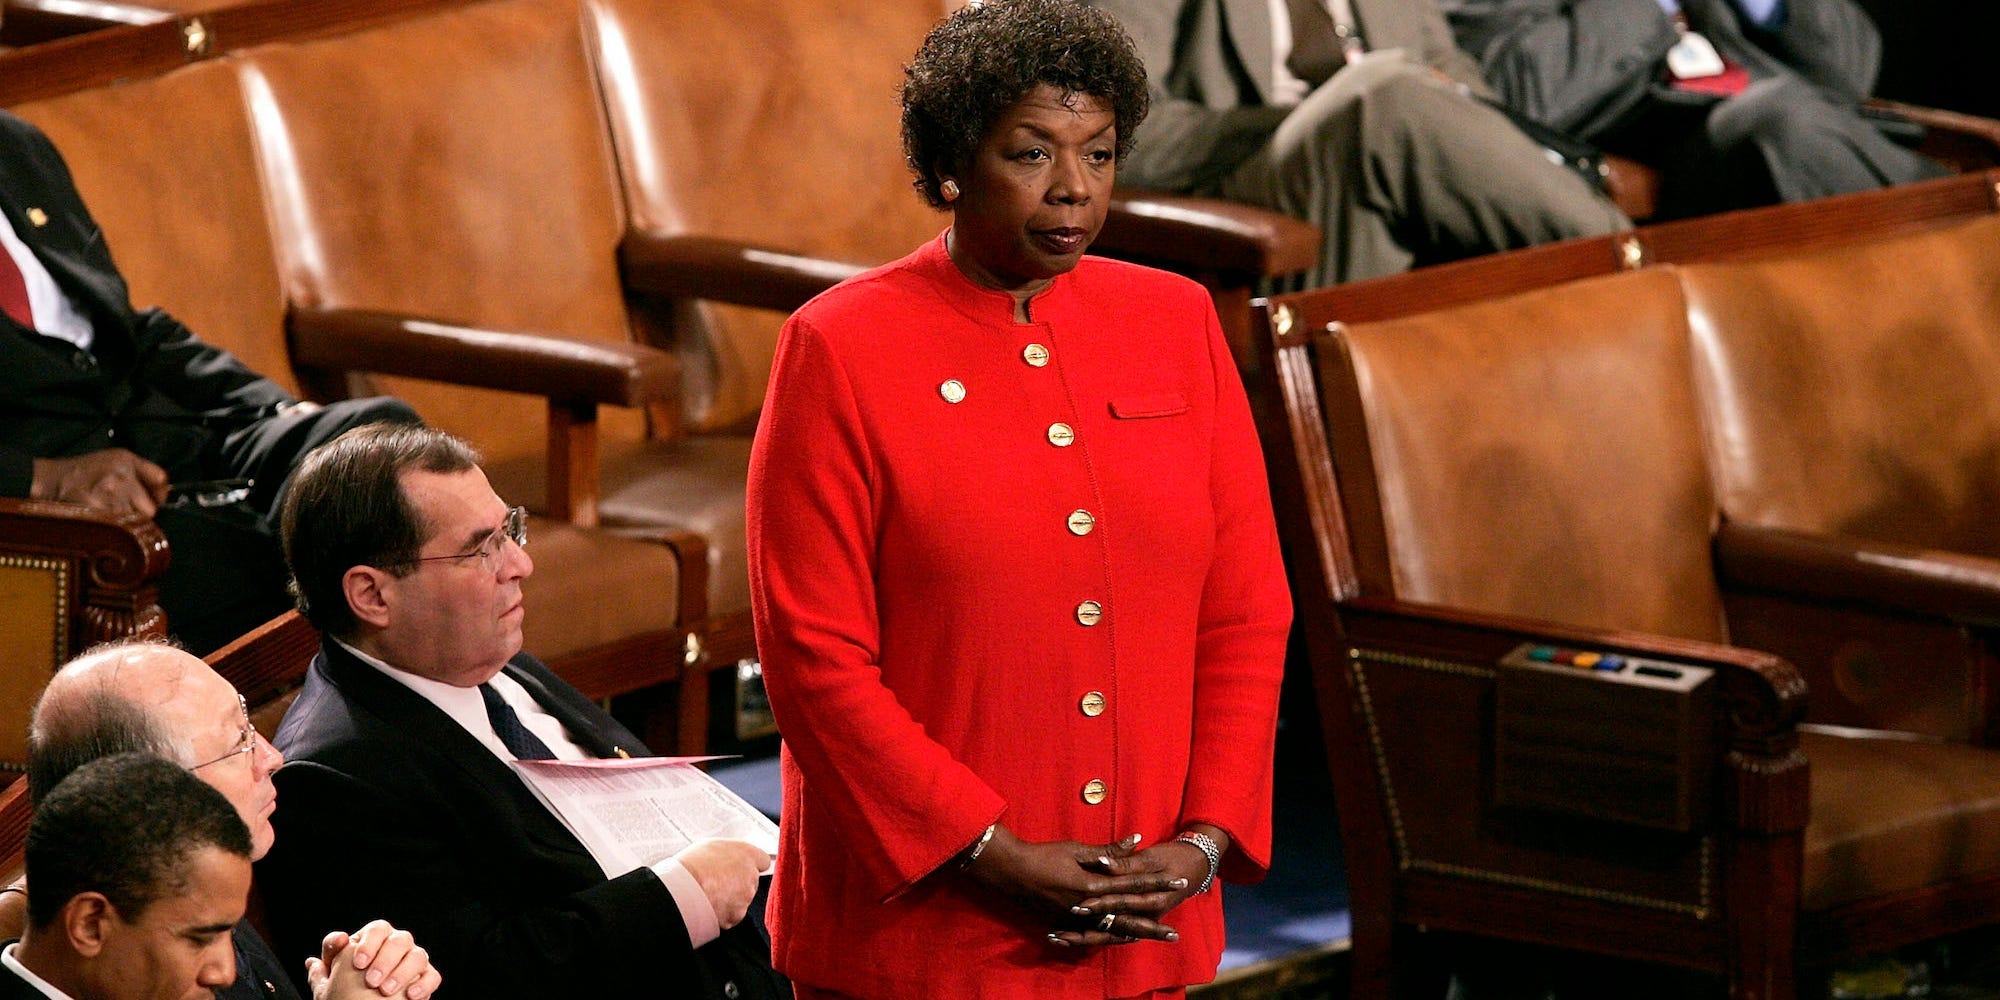 Congresswomen Stephanie Tubbs Jones (D-OH) stands up to object to the Ohio electoral vote during a joint session of Congress January 6, 2005 in Washington, DC